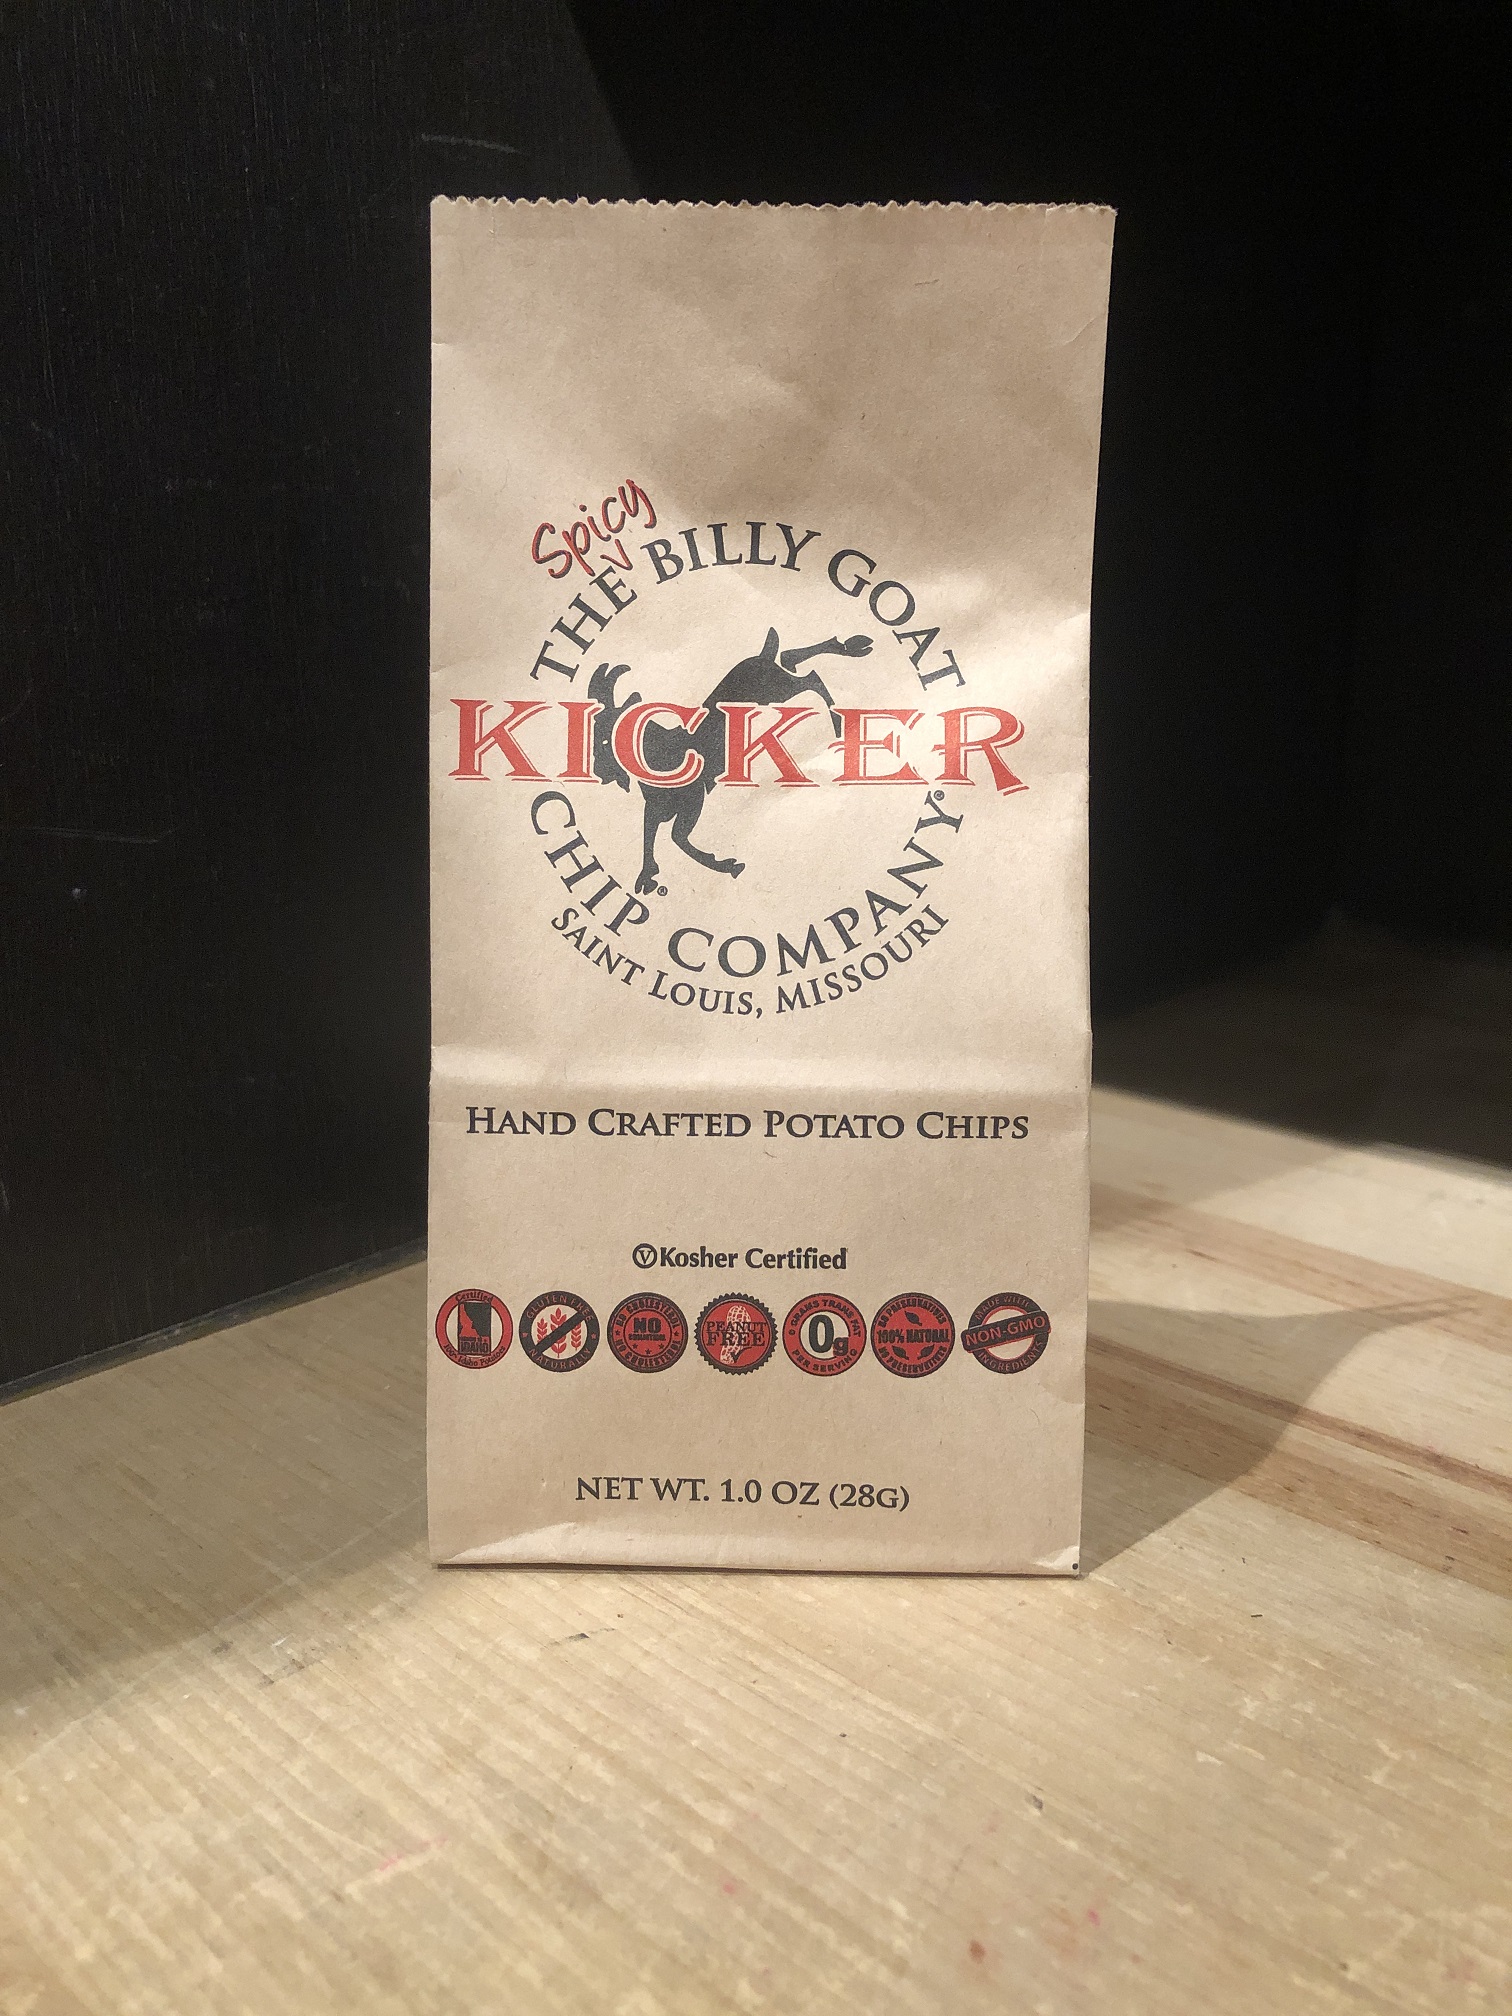 This is an image of our Kicker Billy Goat Chips.